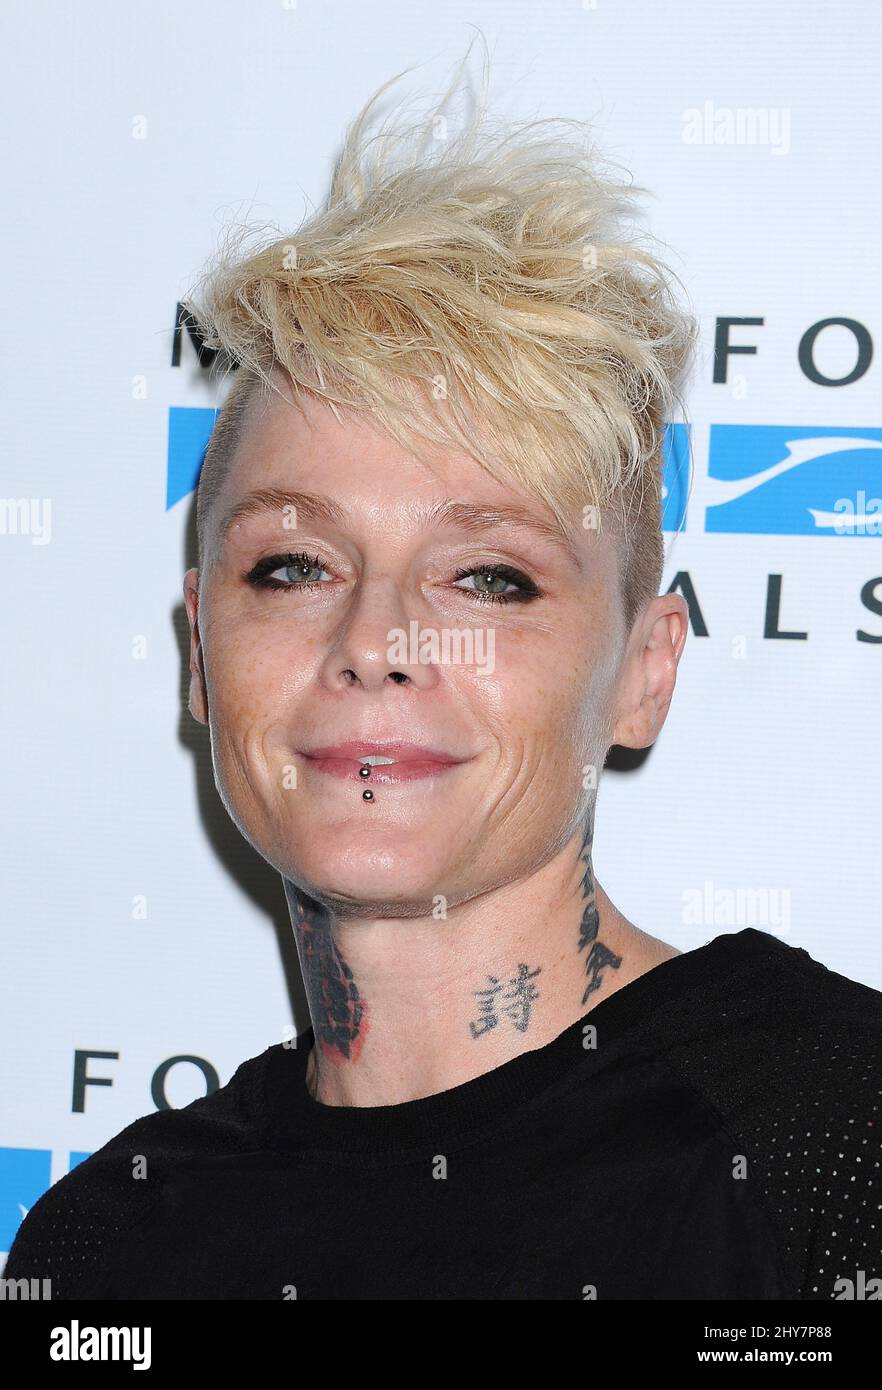 Otep Shamaya attents Mercy for Animals presents 'Hidden Heroes' Gala held at the Unici Casa. Stock Photo